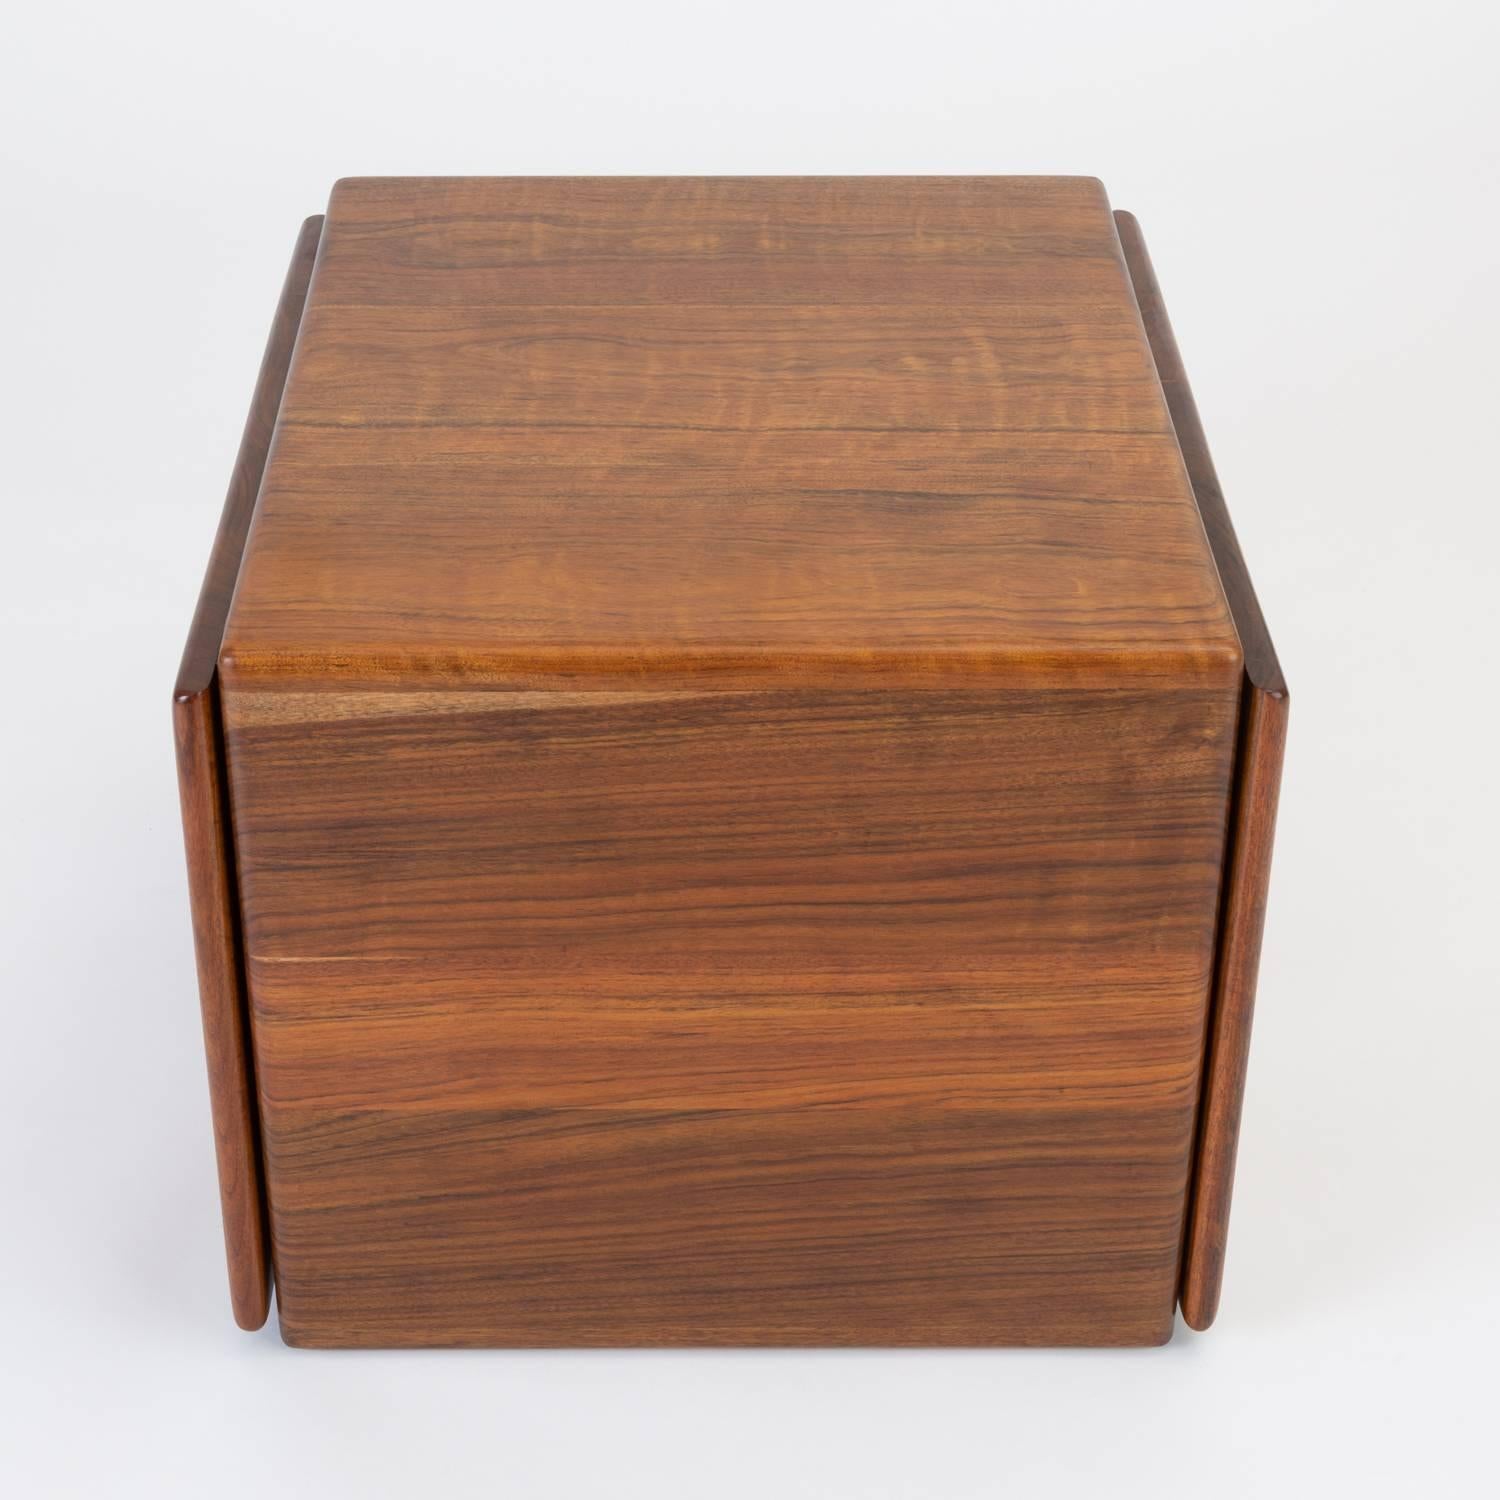 Cube Side Table or Storage Chest in Rare African Shedua Wood by Gerald McCabe 1